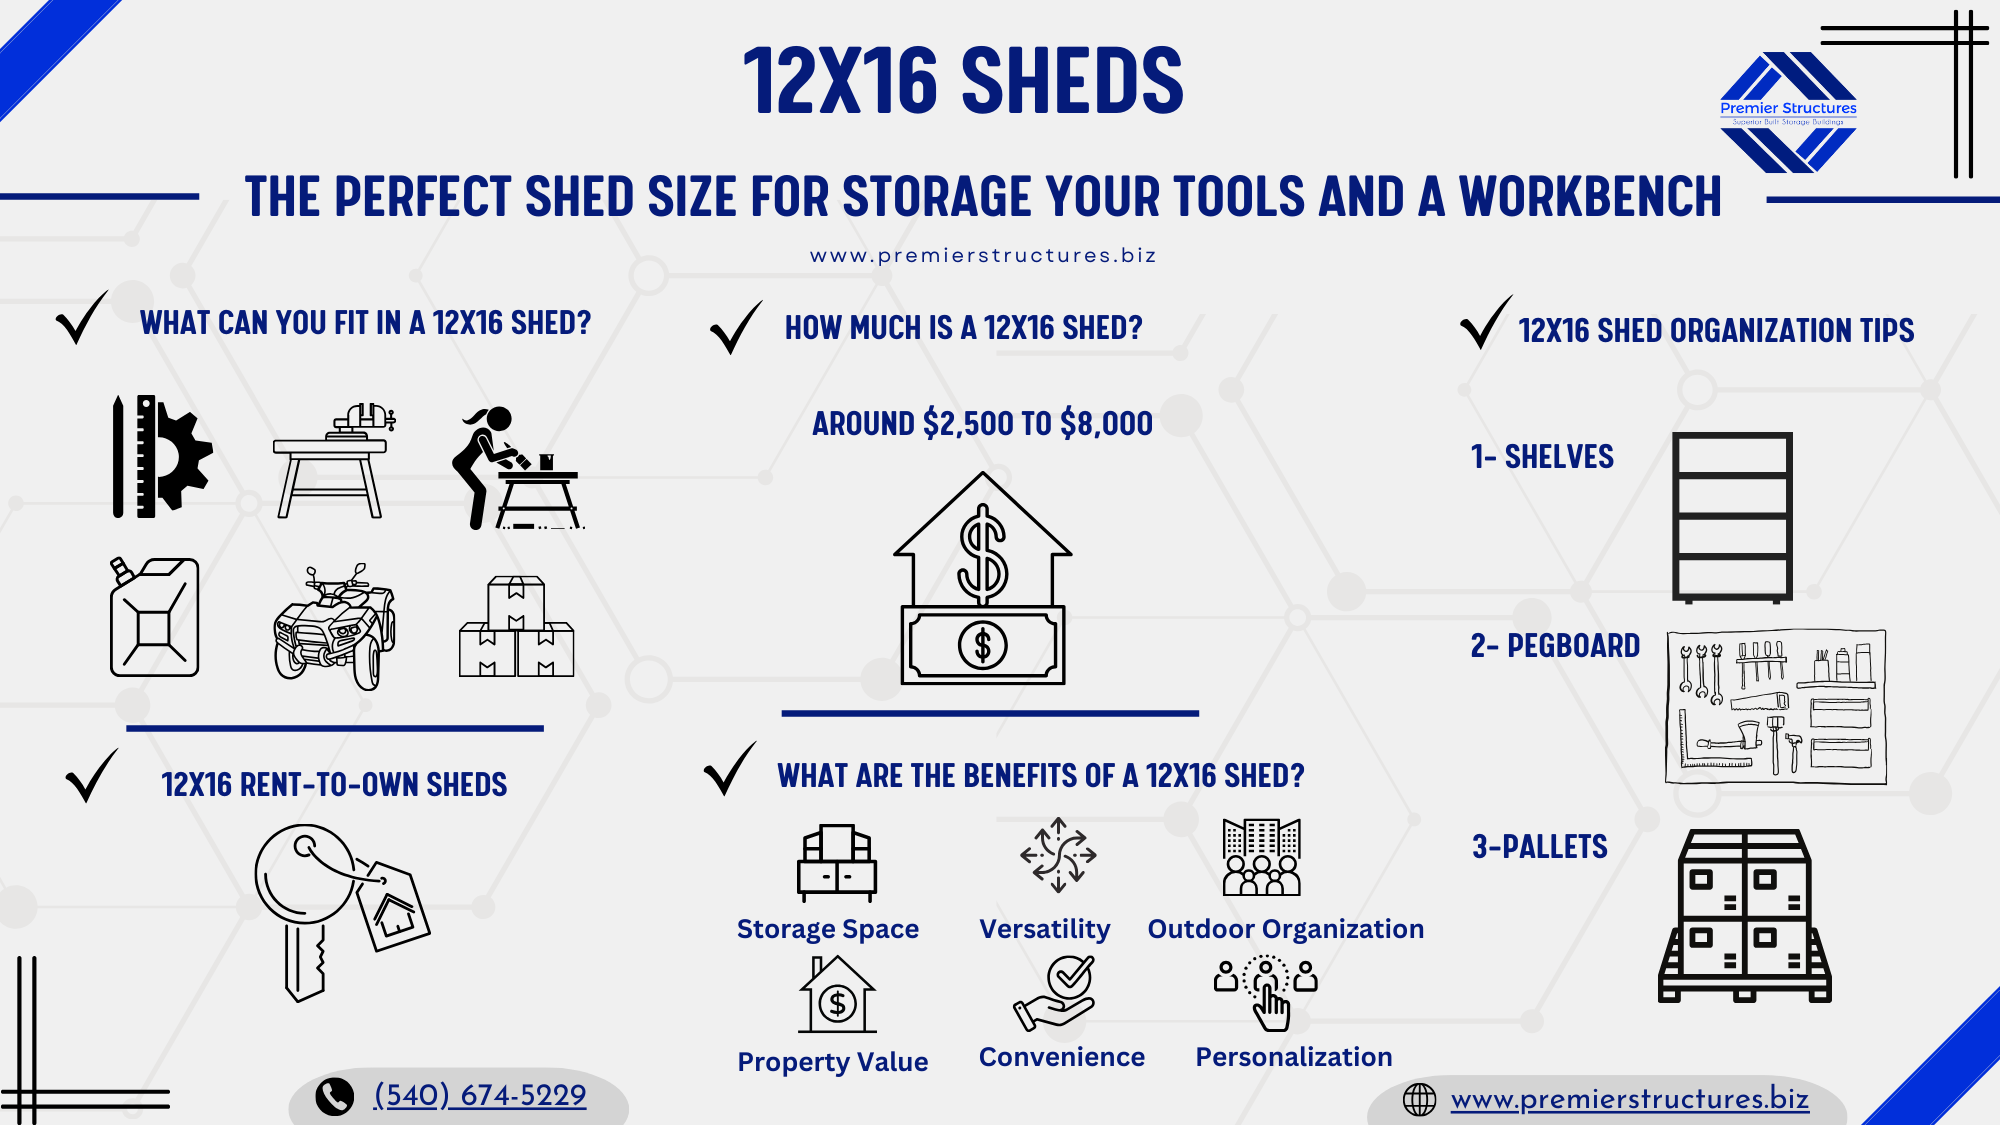 12x16 sheds and what you can store in them